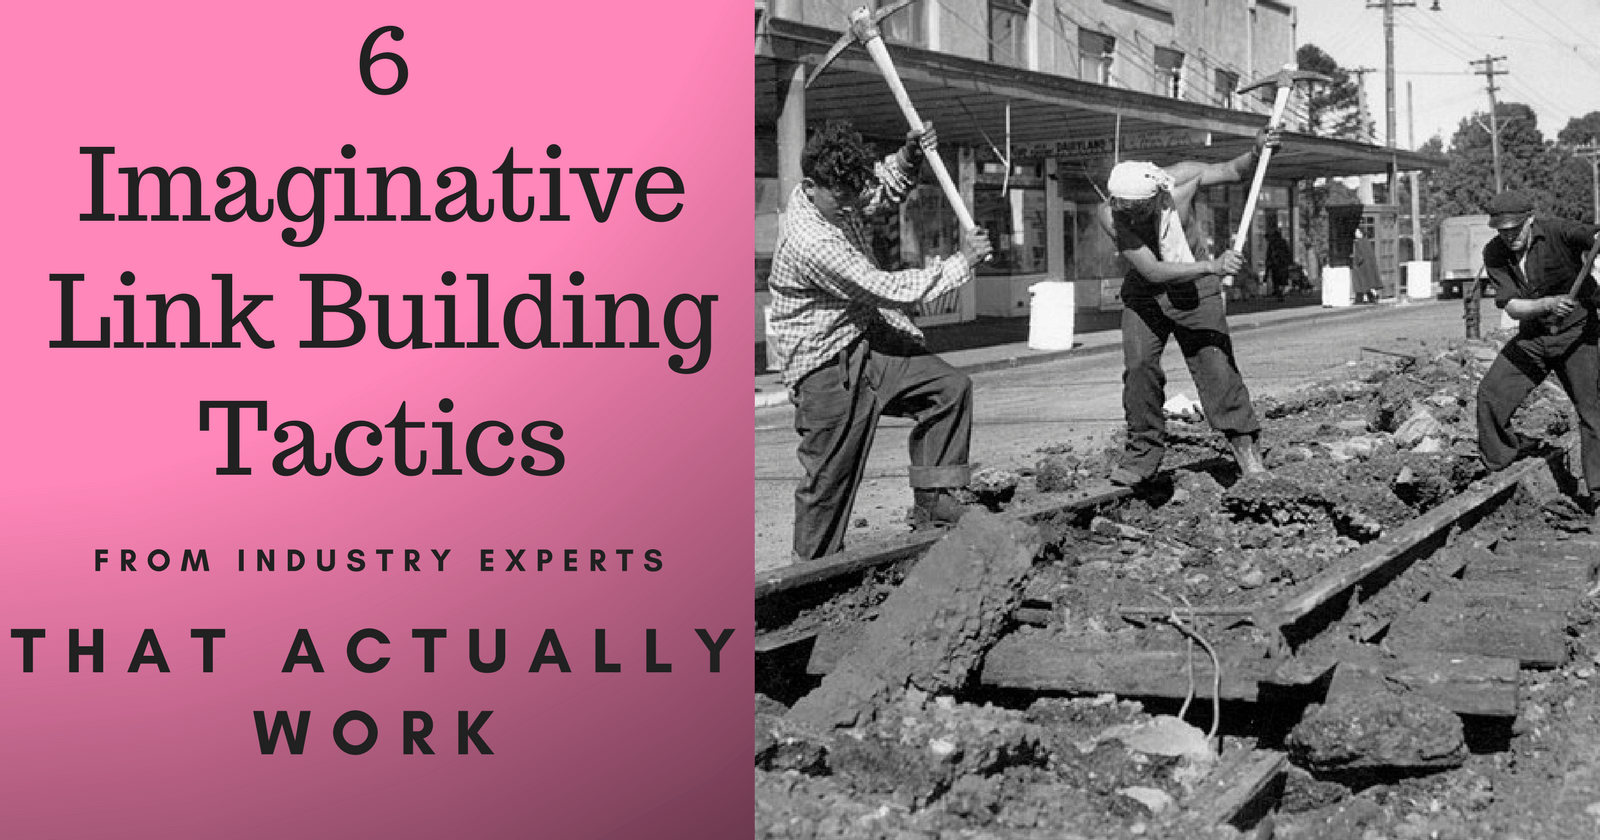 6 Imaginative Link Building Tactics from Industry Experts that Actually Work